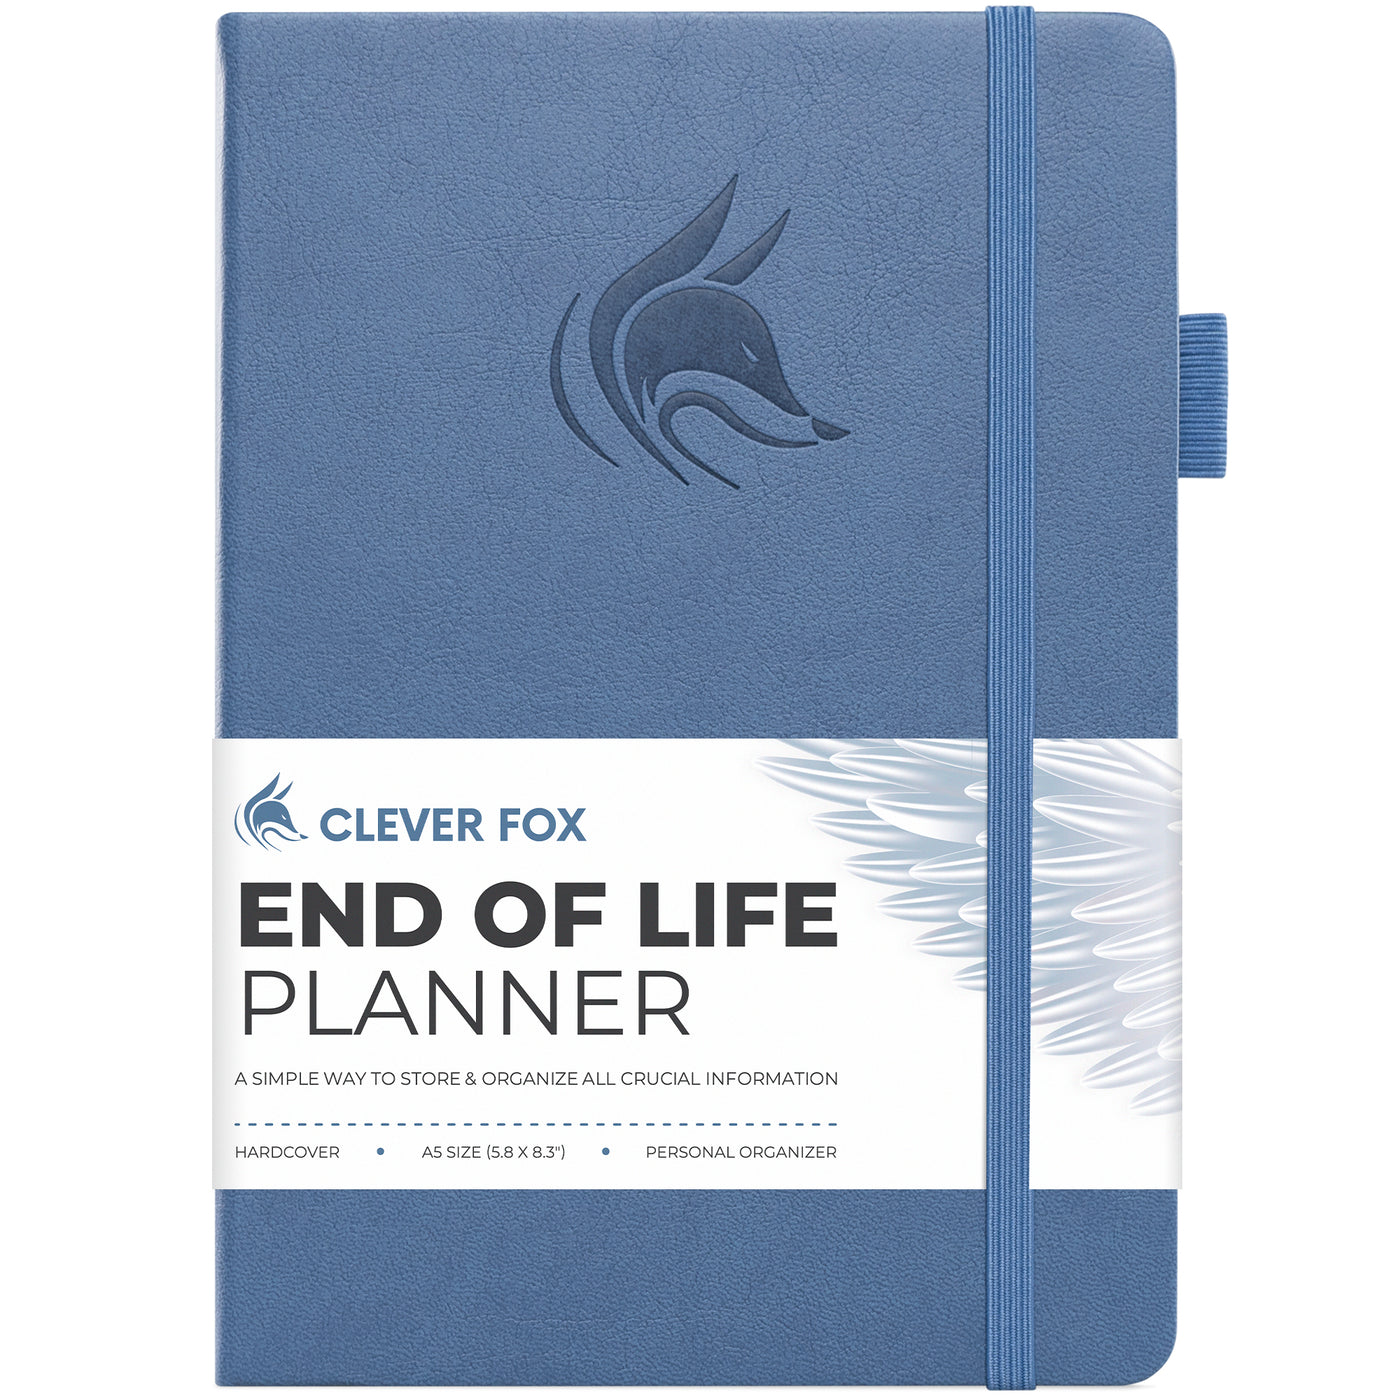 When I Die What You Have to Do: End of Life Planner Workbook is Record Book  & Organizer of The Details That Family Members, Book For Death (Preparing